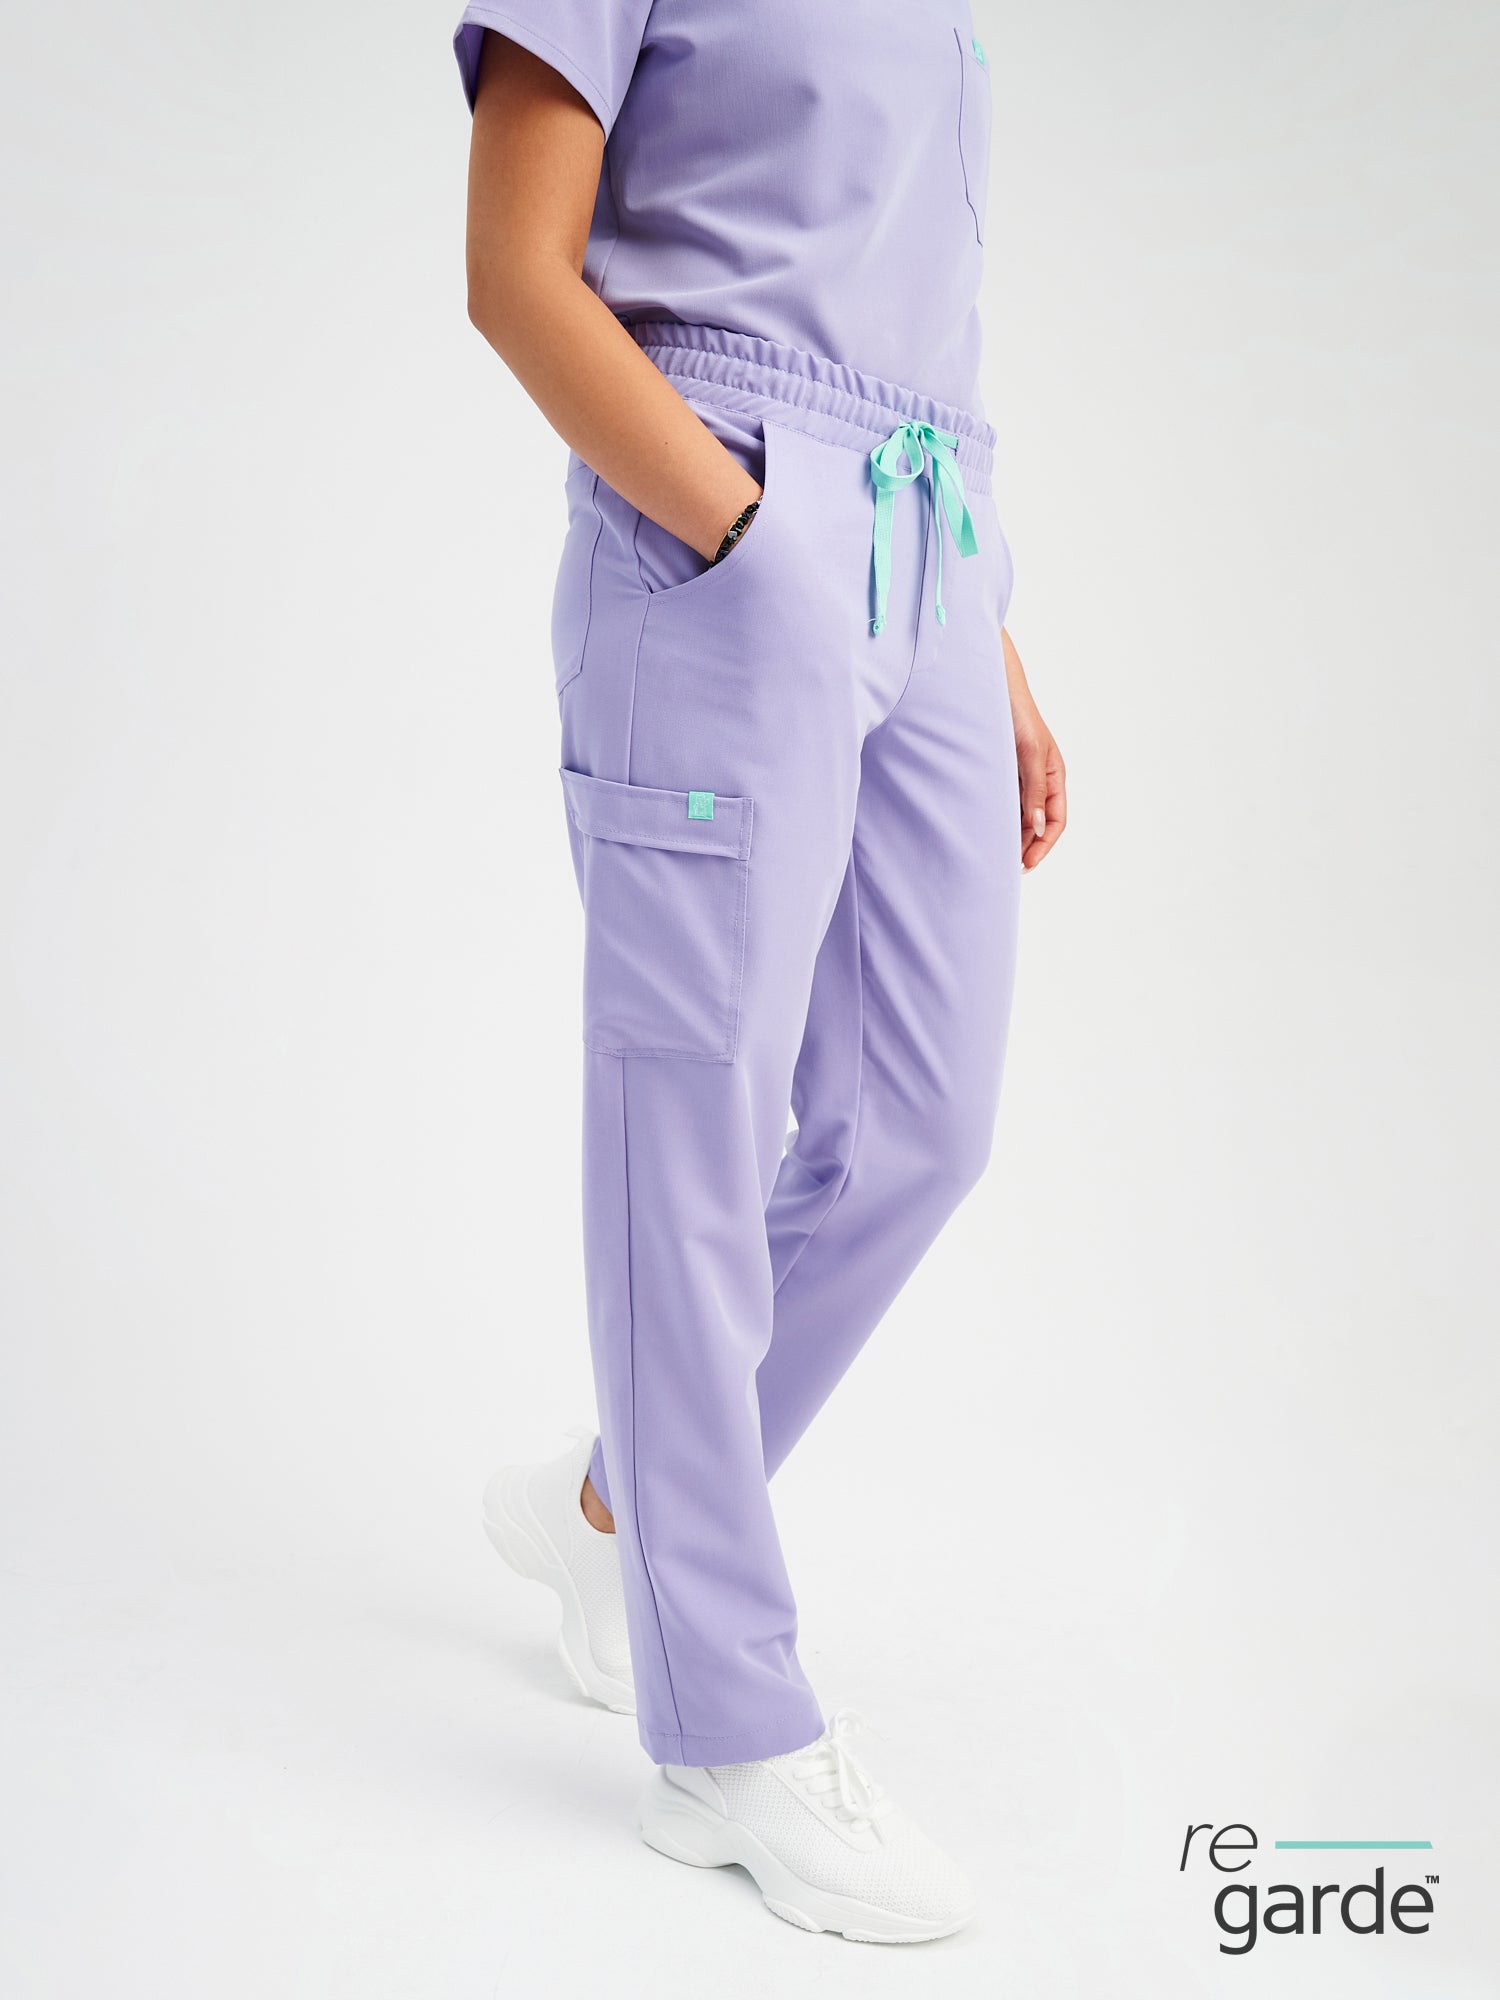 Valpark Shopping Plaza - Leggings scrub pants from Med Couture